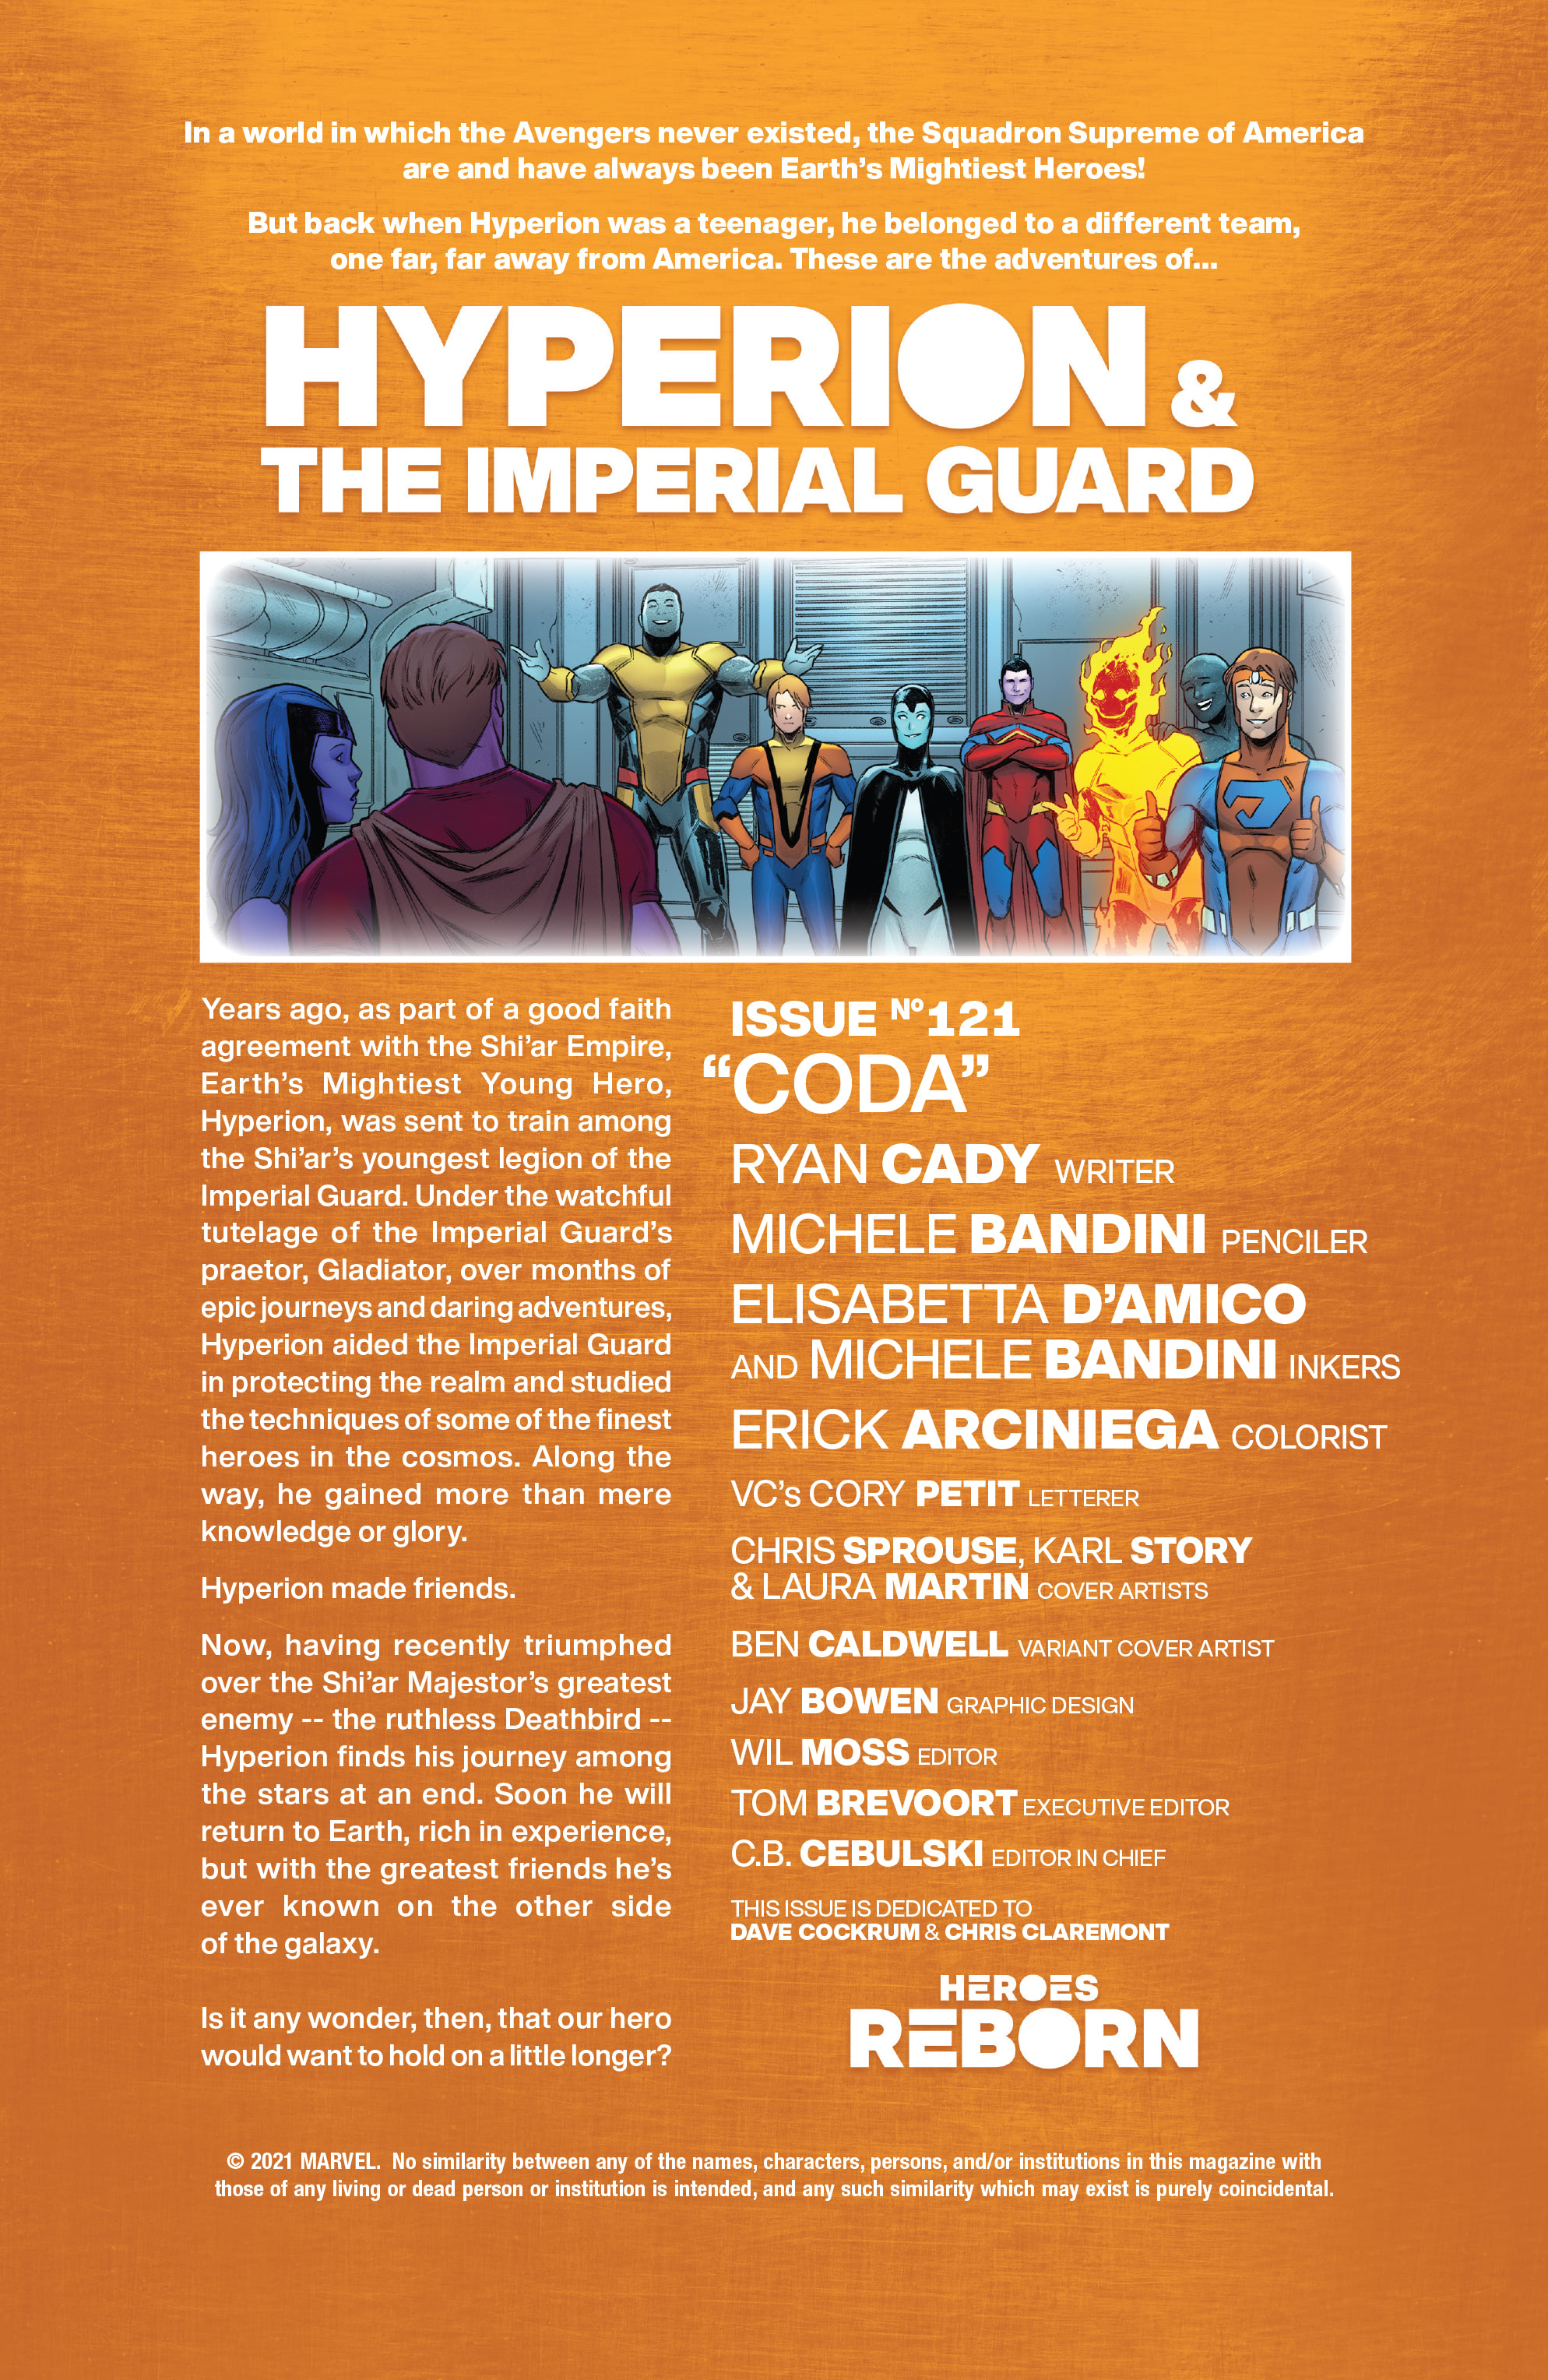 Read online Heroes Reborn: One-Shots comic -  Issue # Hyperion & the Imperial Squad - 2